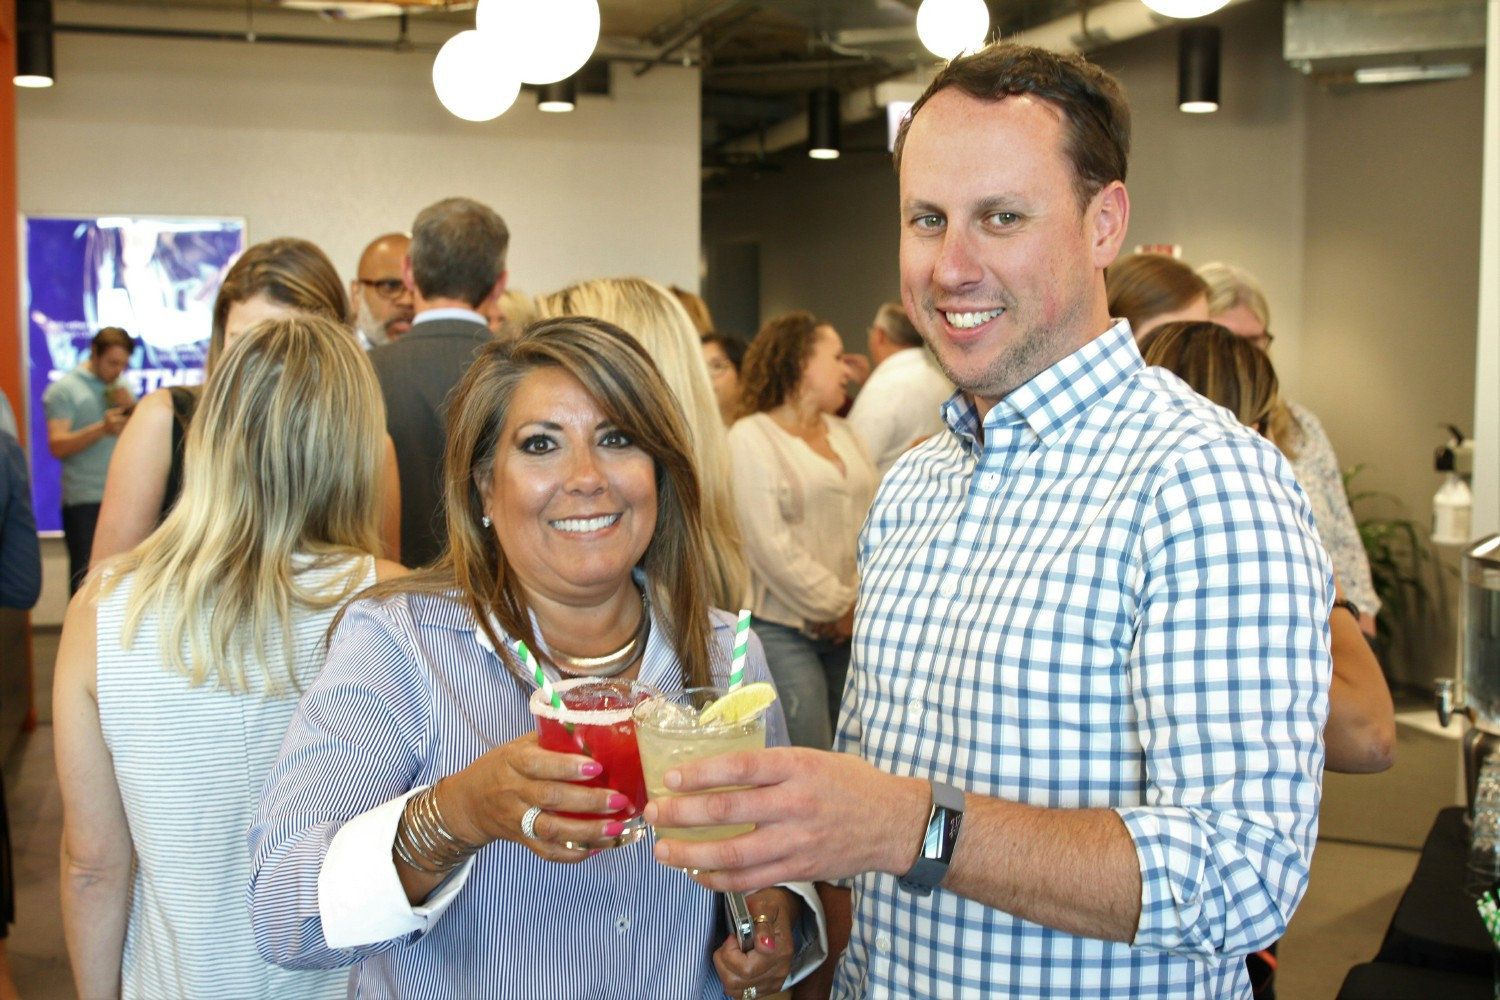 Colleagues celebrate Colleague Appreciation Month at a Margarita Happy Hour.